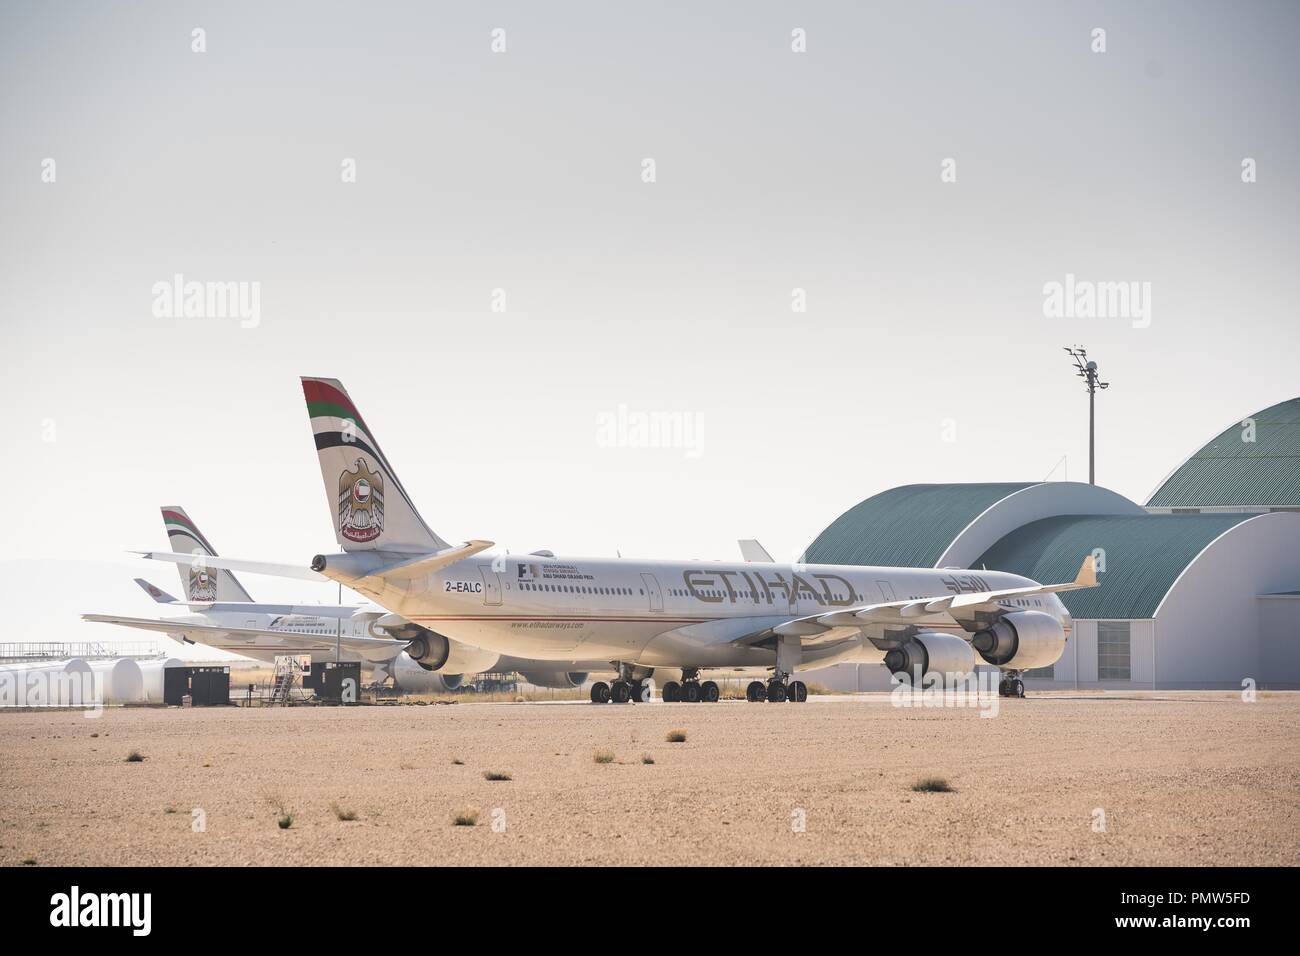 Teruel, Spain. 27th Aug, 2018. An Etihad airline airbus A340 seen parked at Teruel airport.Many people think Teruel airportis an aircraft graveyard where aircrafts go through their final journey and have their metal recycled. In fact this airport located in eastern Spain is more like a hotel for aircrafts to take a long nap. It hosts aircraft from all over the world that have been withdrawn from service, be it temporarily or permanently, and caters to their maintenance needs.Some are ready to fly but are waiting for financial or legal issues to be sorted out. Some are here because their Stock Photo